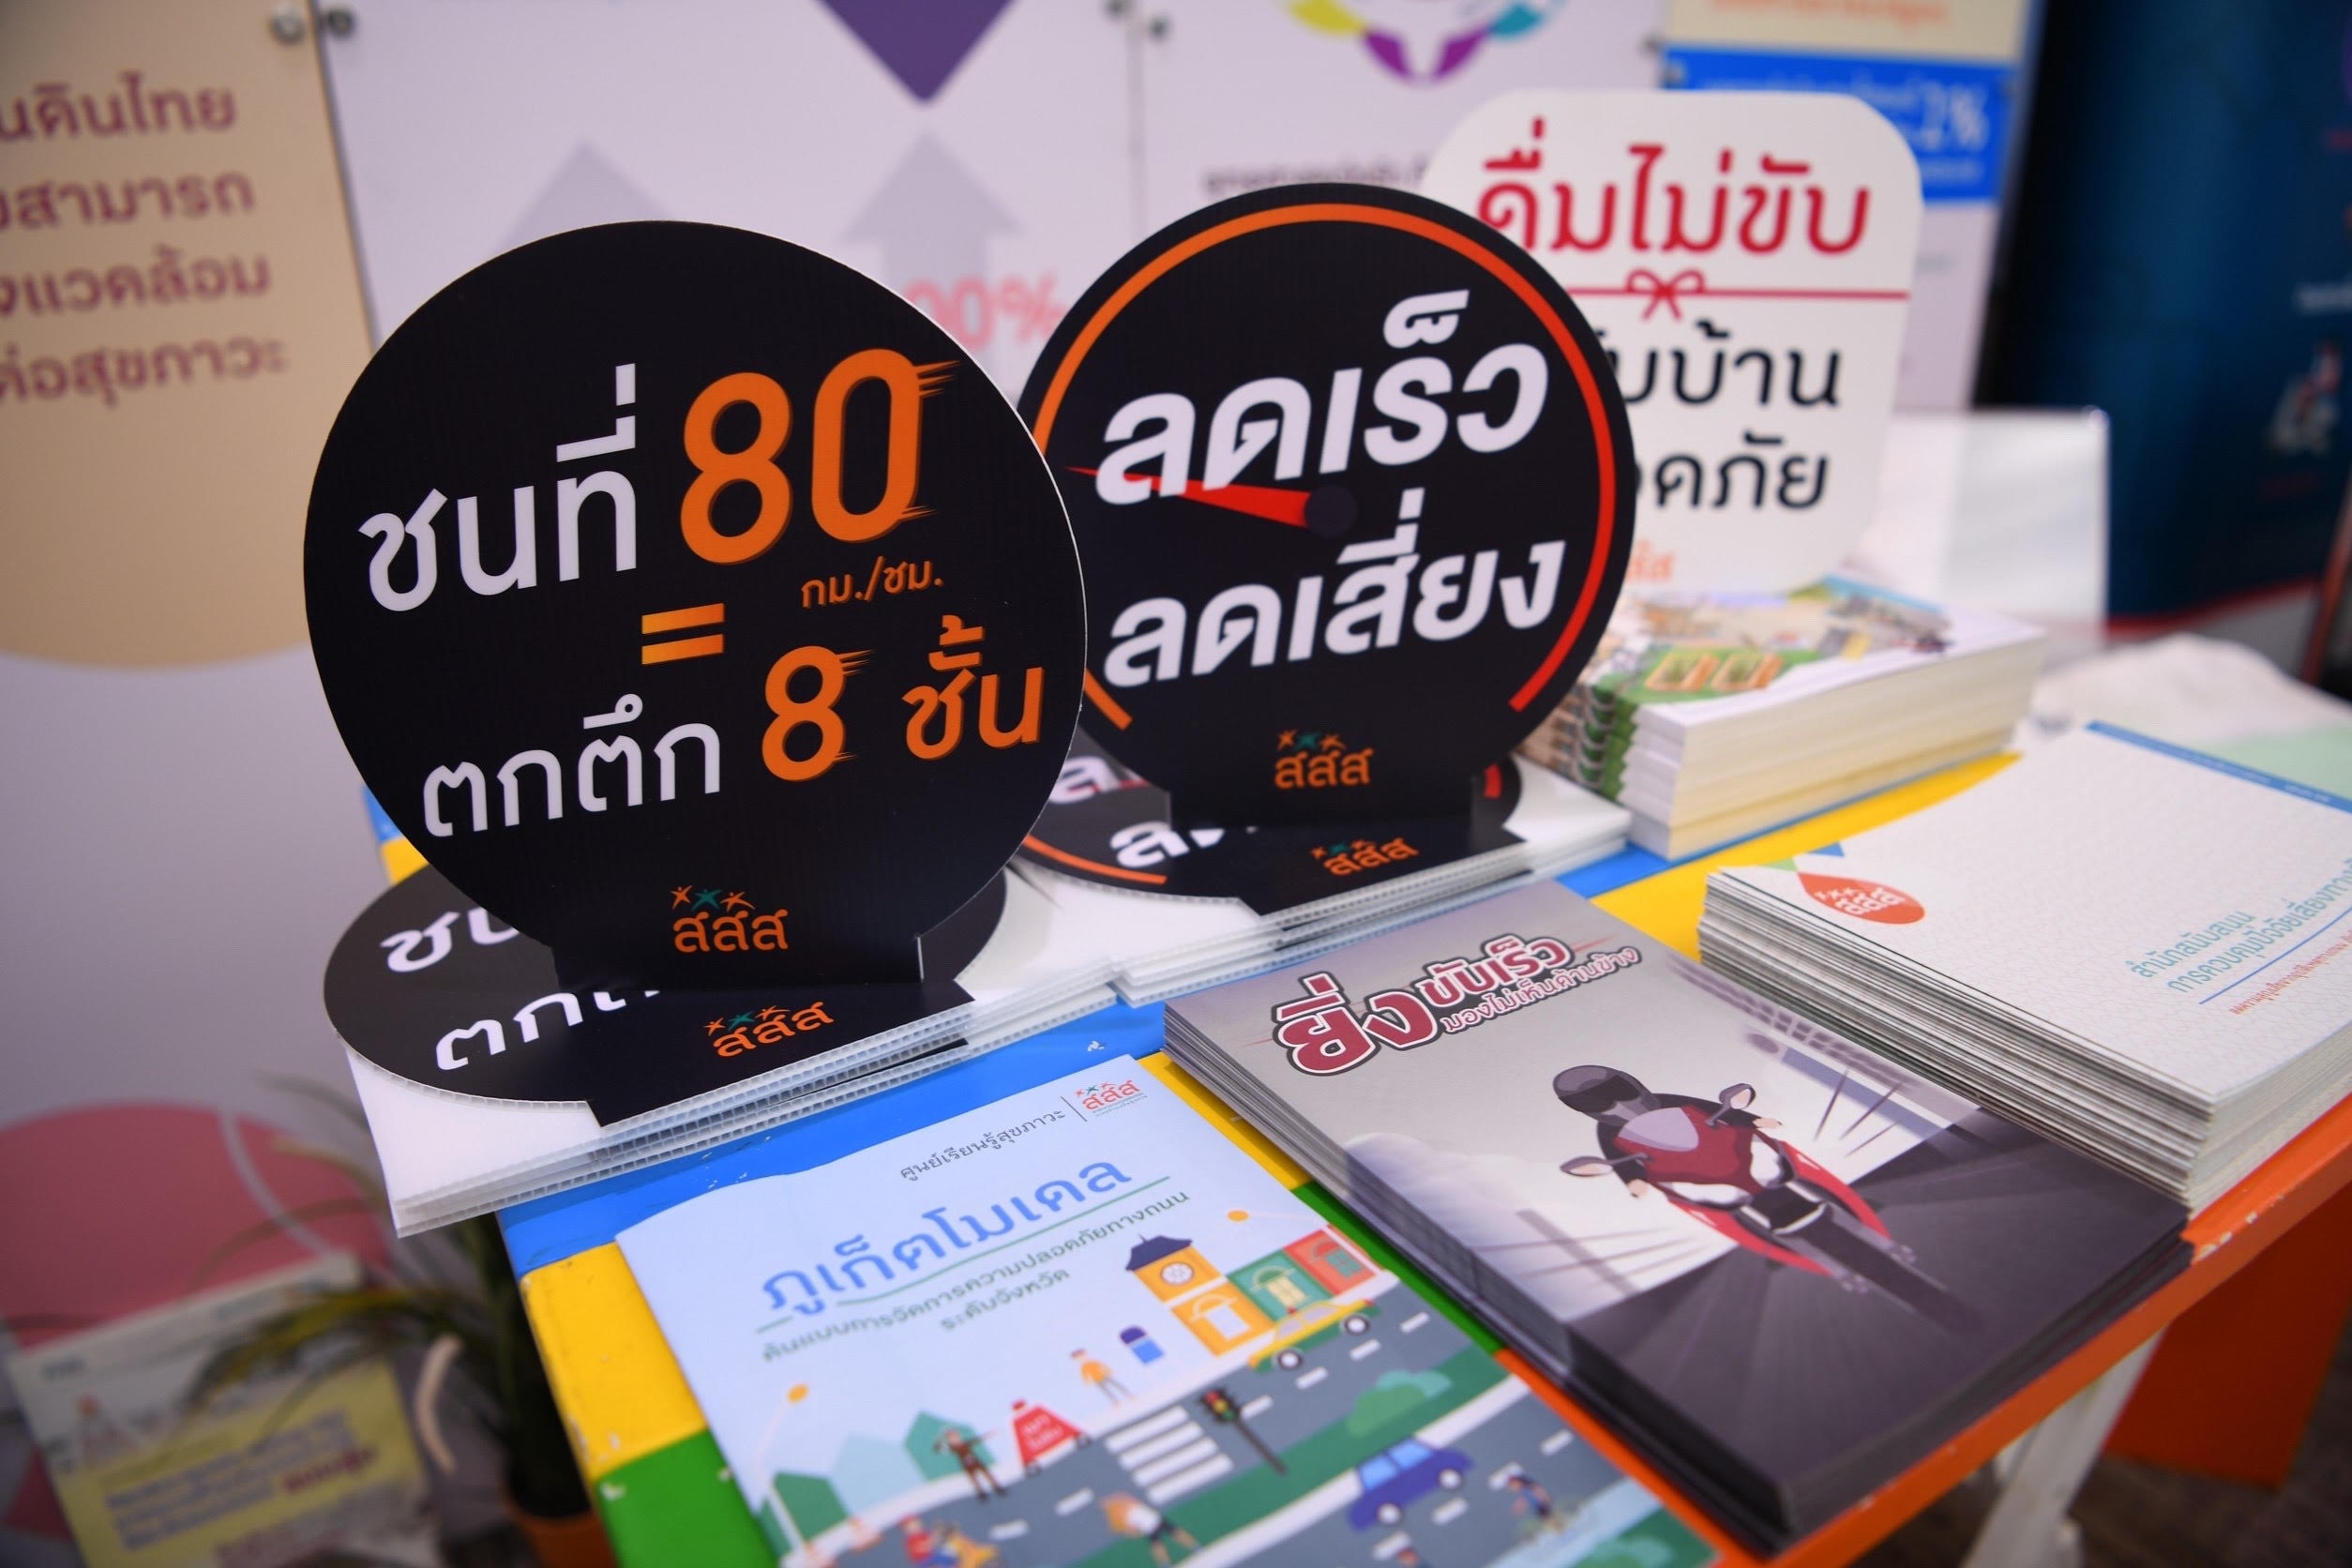 ThaiHealth joins hands with partners to reduce accidents and promote road safety thaihealth